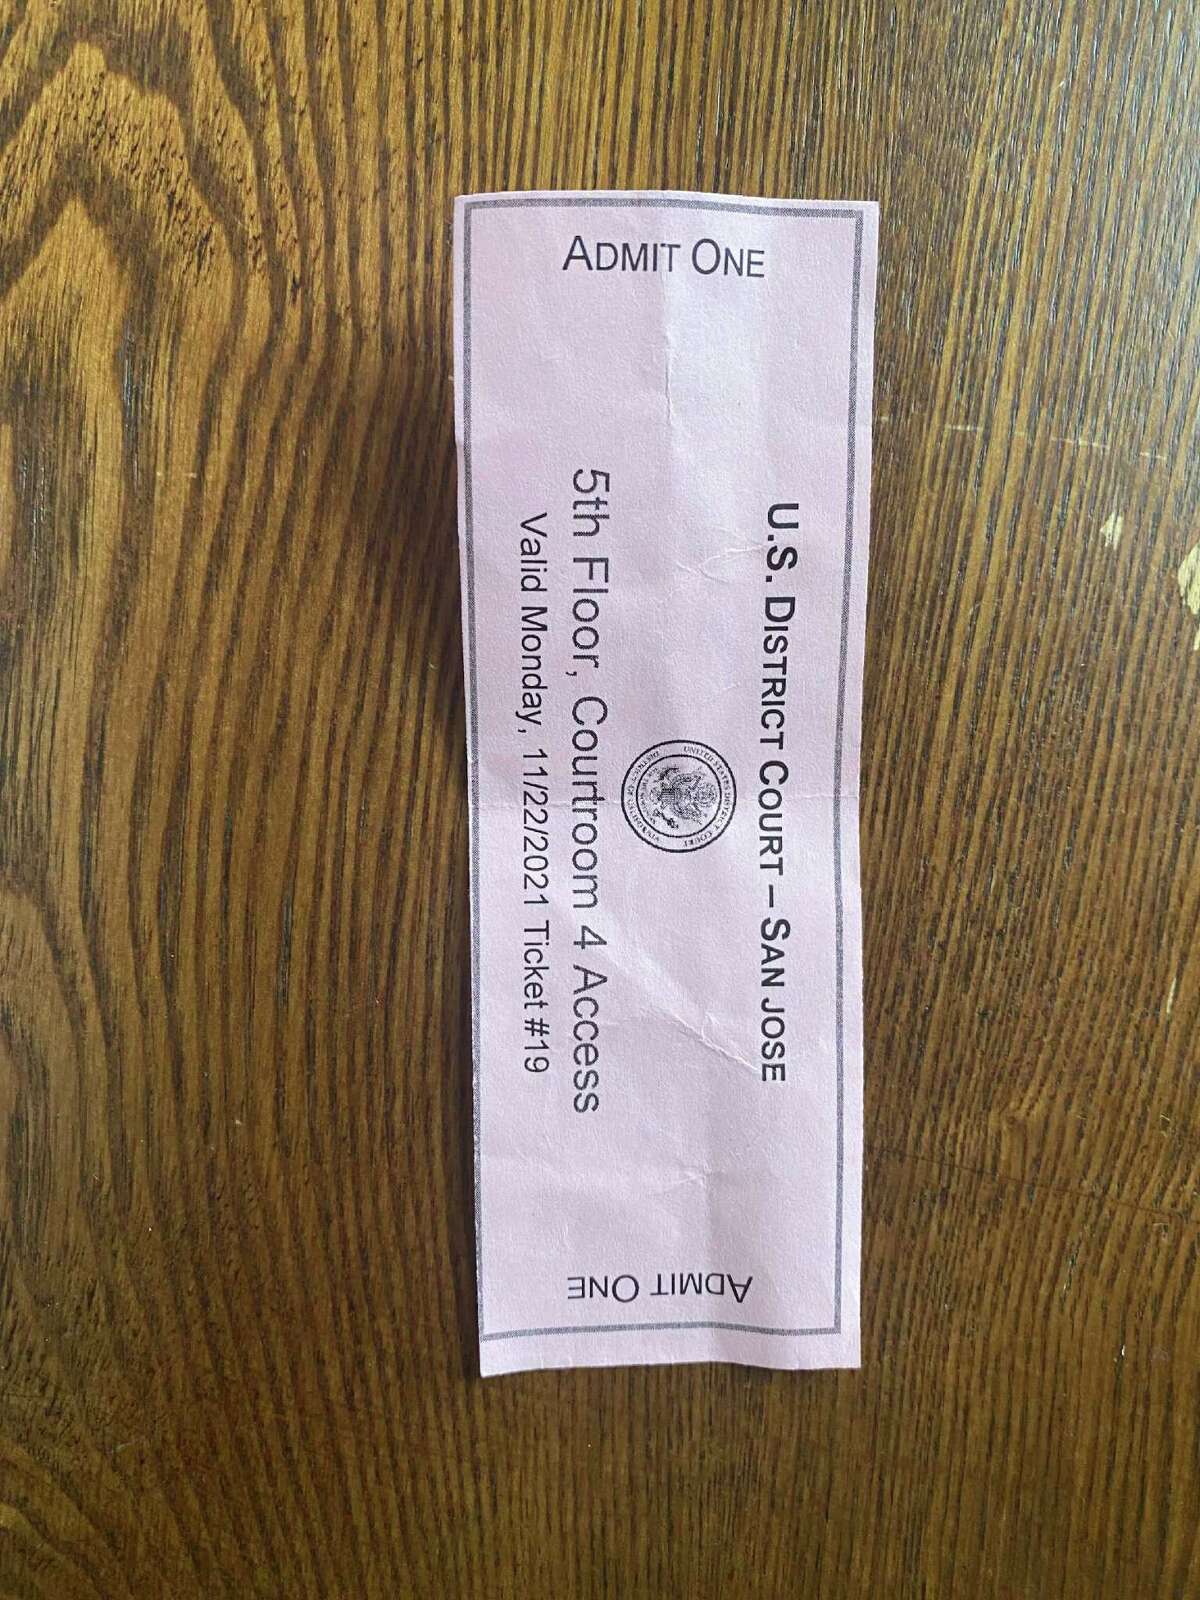 One of the tickets given to attendees of the Elizabeth Holmes trial is seen in San Francisco on December 6, 2021.